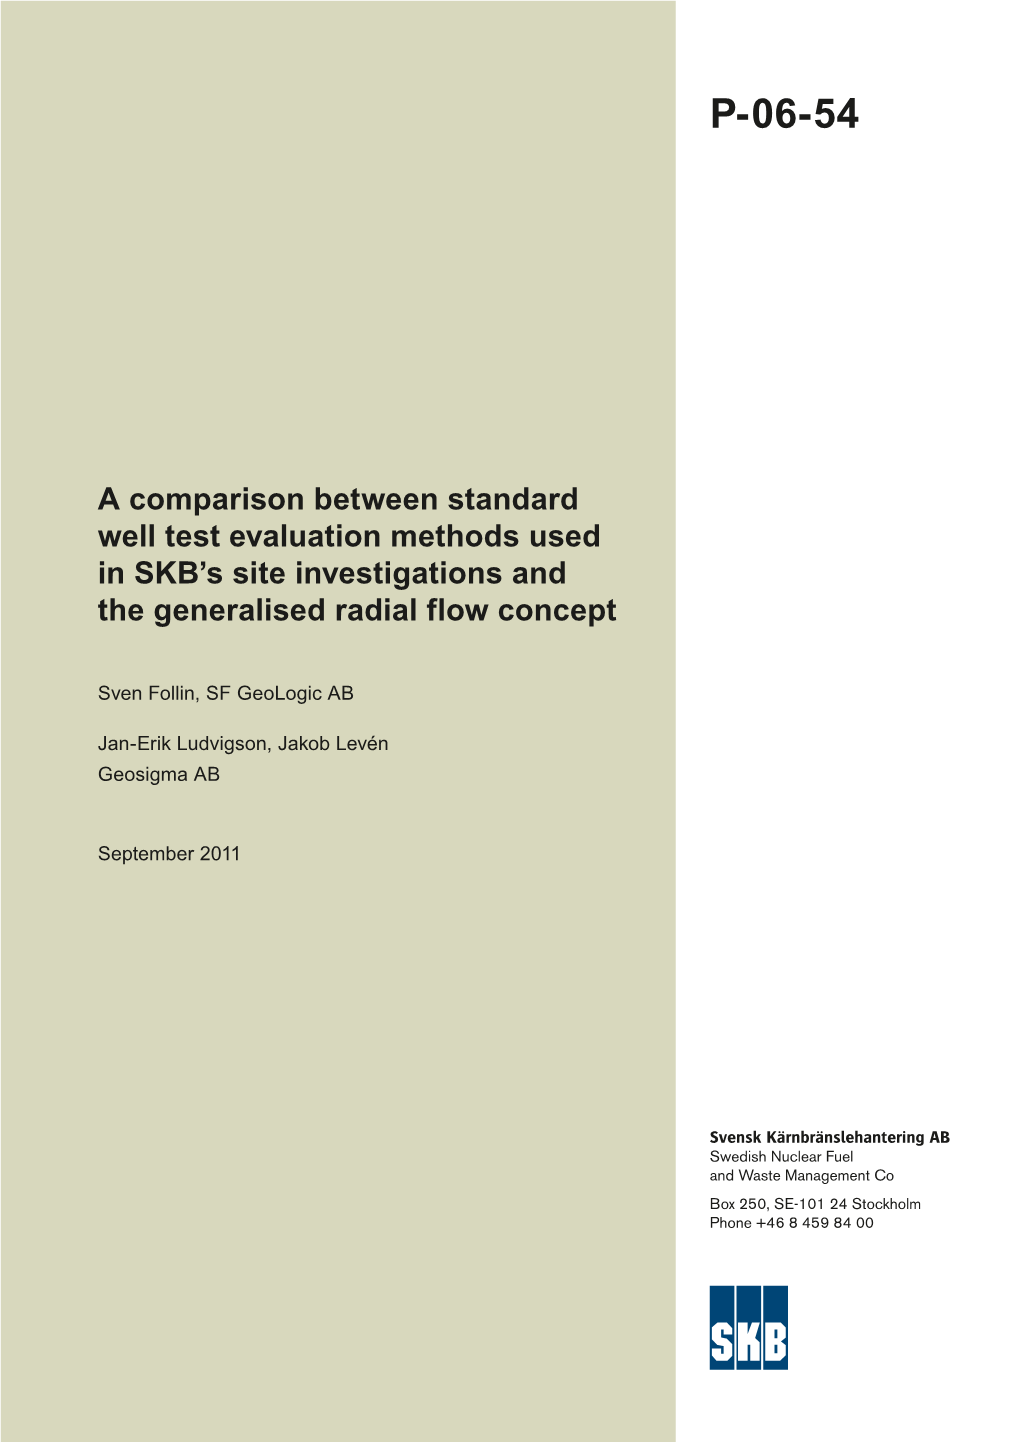 A Comparison Between Standard Well Test Evaluation Methods Used in SKB’S Site Investigations and the Generalised Radial Flow Concept